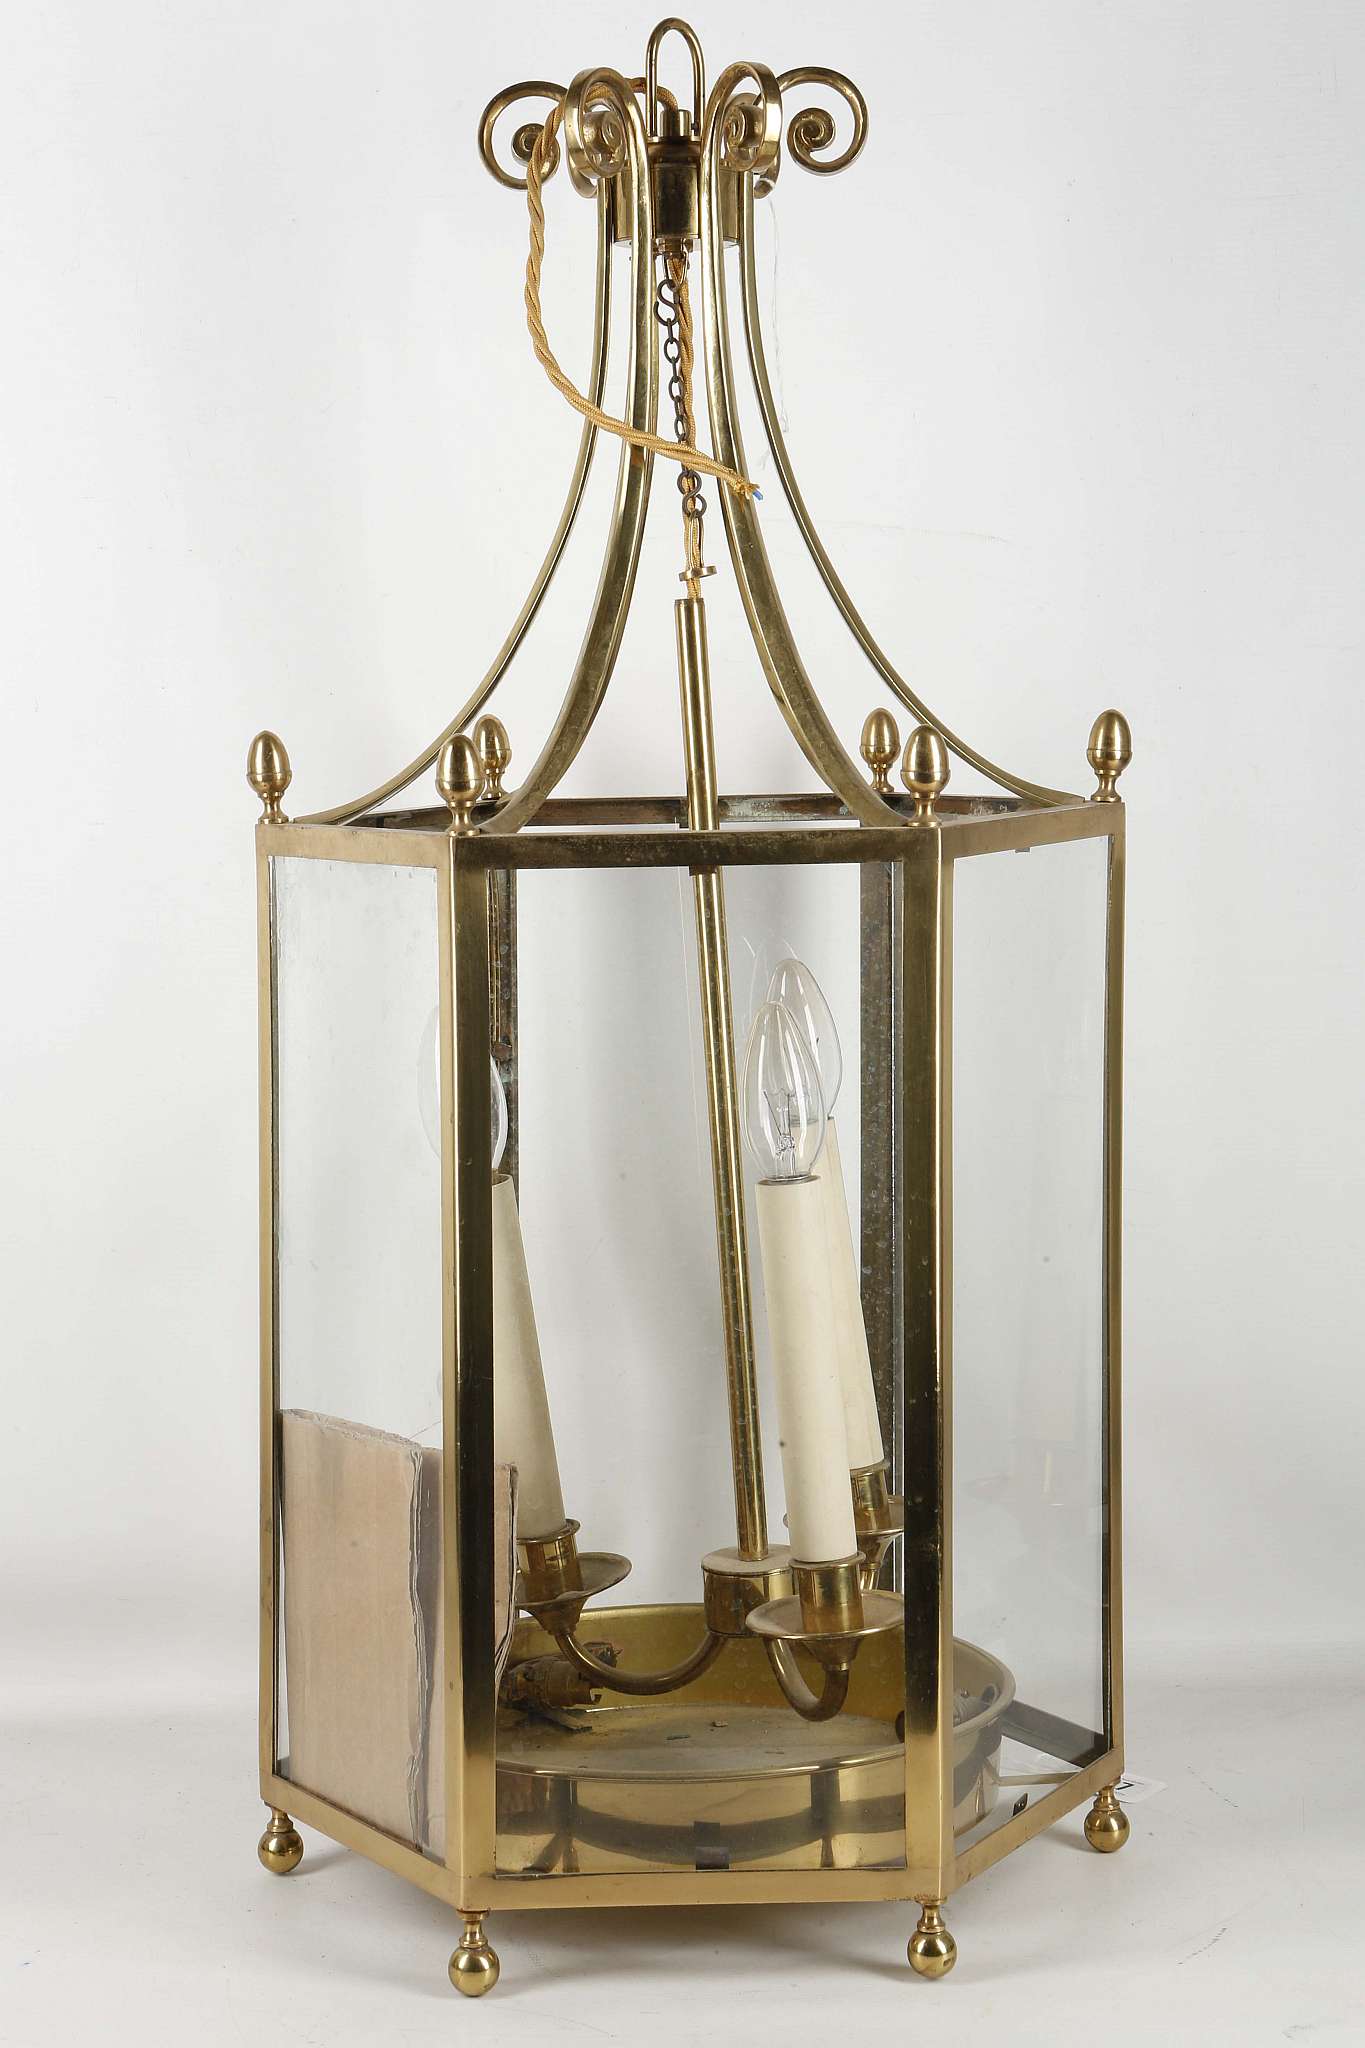 A mid 20th century octagonal brass and glass hanging lantern, originally hung in a Chelsea manor